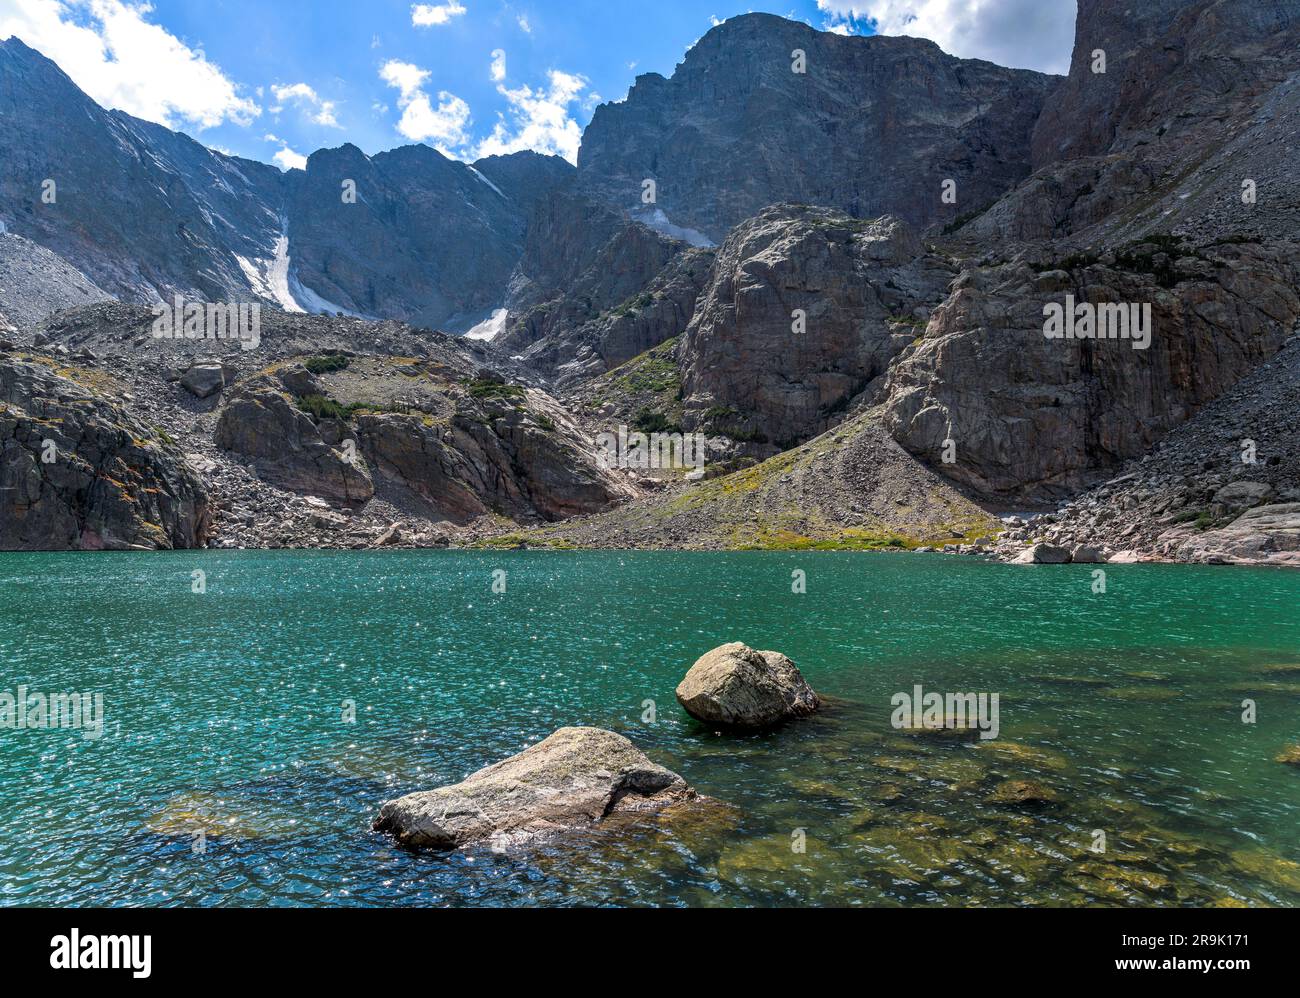 Sky Pond - A closeup view of a colorful alpine lake - Sky Pond at base of Taylor Peak and Taylor Glacier on a sunny Summer day. RMNP, CO, USA. Stock Photo